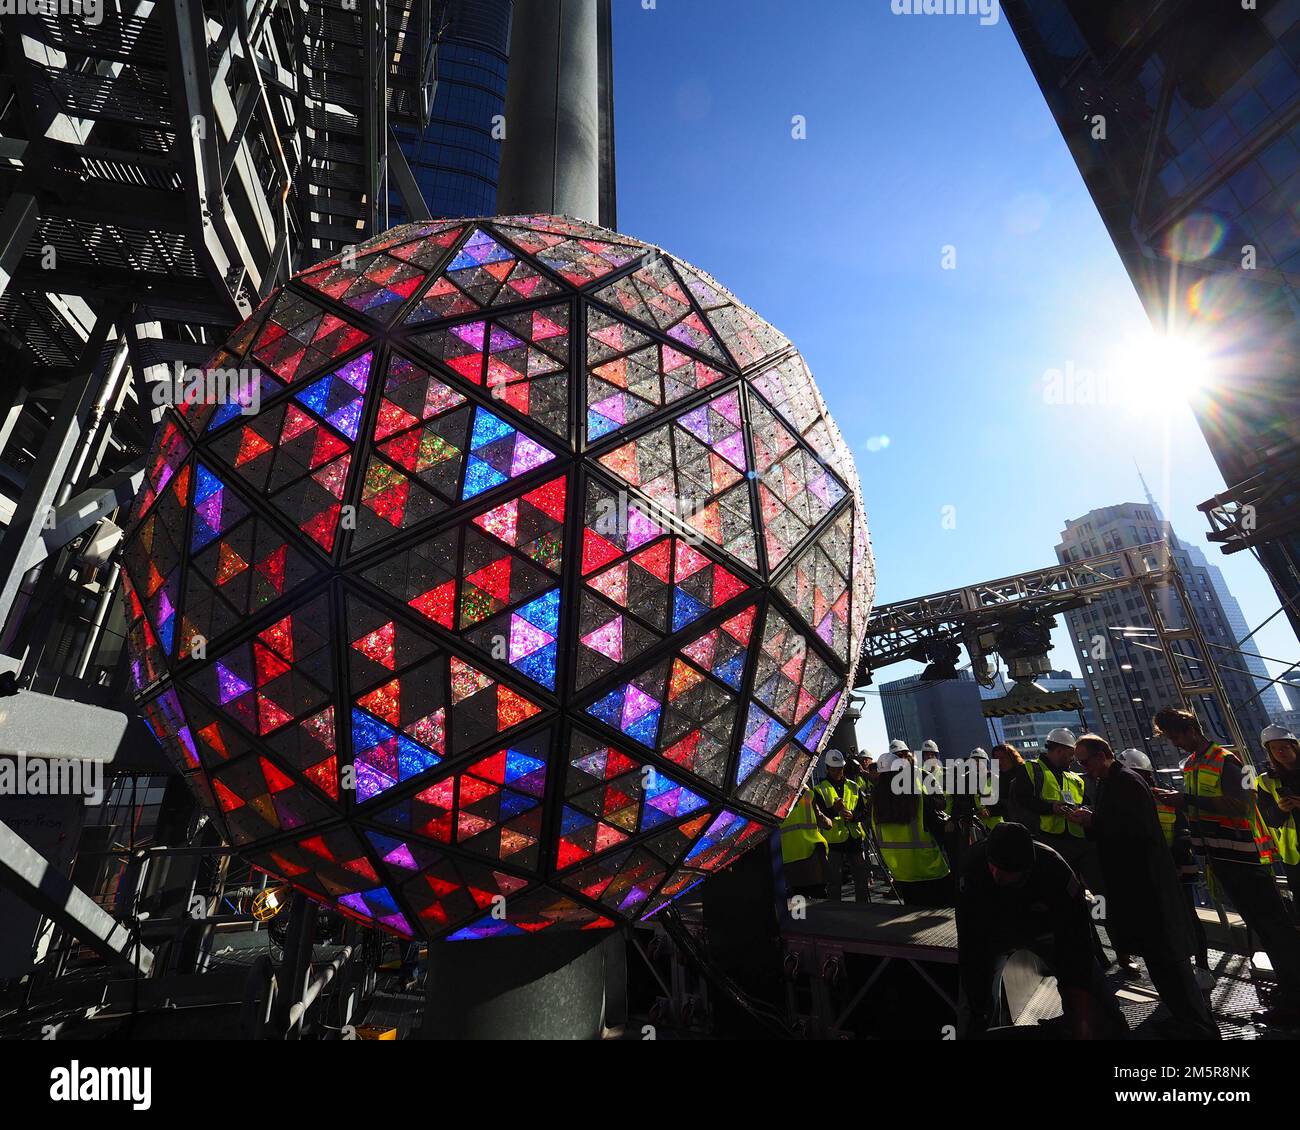 New York, NY, USA. 30th Dec, 2022. The Times Square New Year's Eve Ball is tested in preparation for the December 31 celebration in Times Square, New York City, on December 30, 2022. - With the ball lit, it is sent to the top of the 130-foot (39.6-meter) pole on One Times Square (Credit Image: © Debra L. Rothenberg/ZUMA Press Wire) Stock Photo